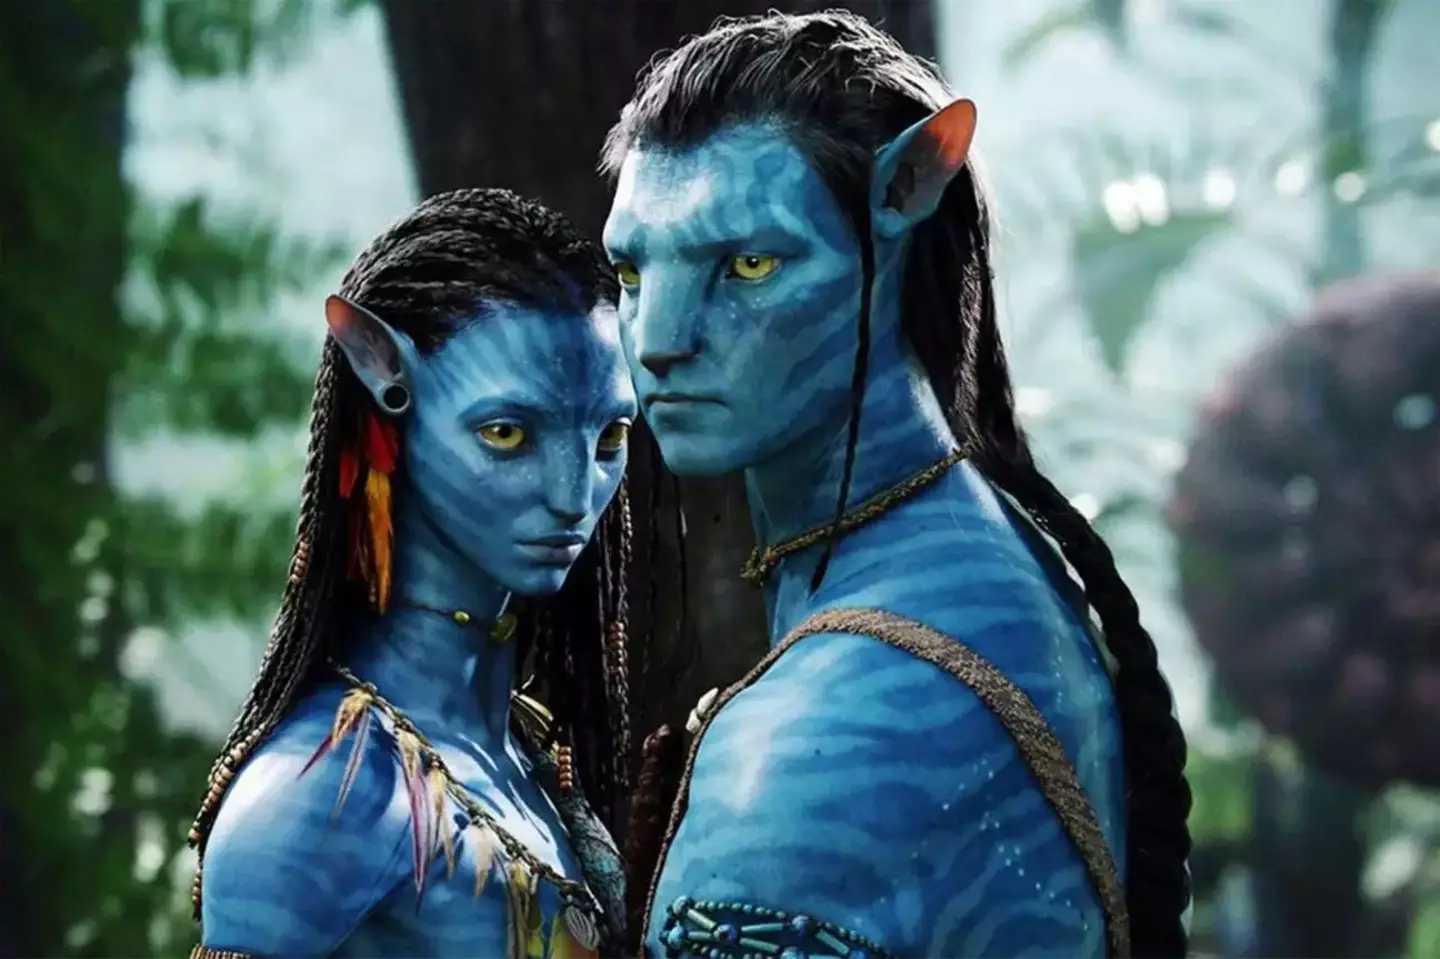 Avatar 2 will be released 13 years after the original.